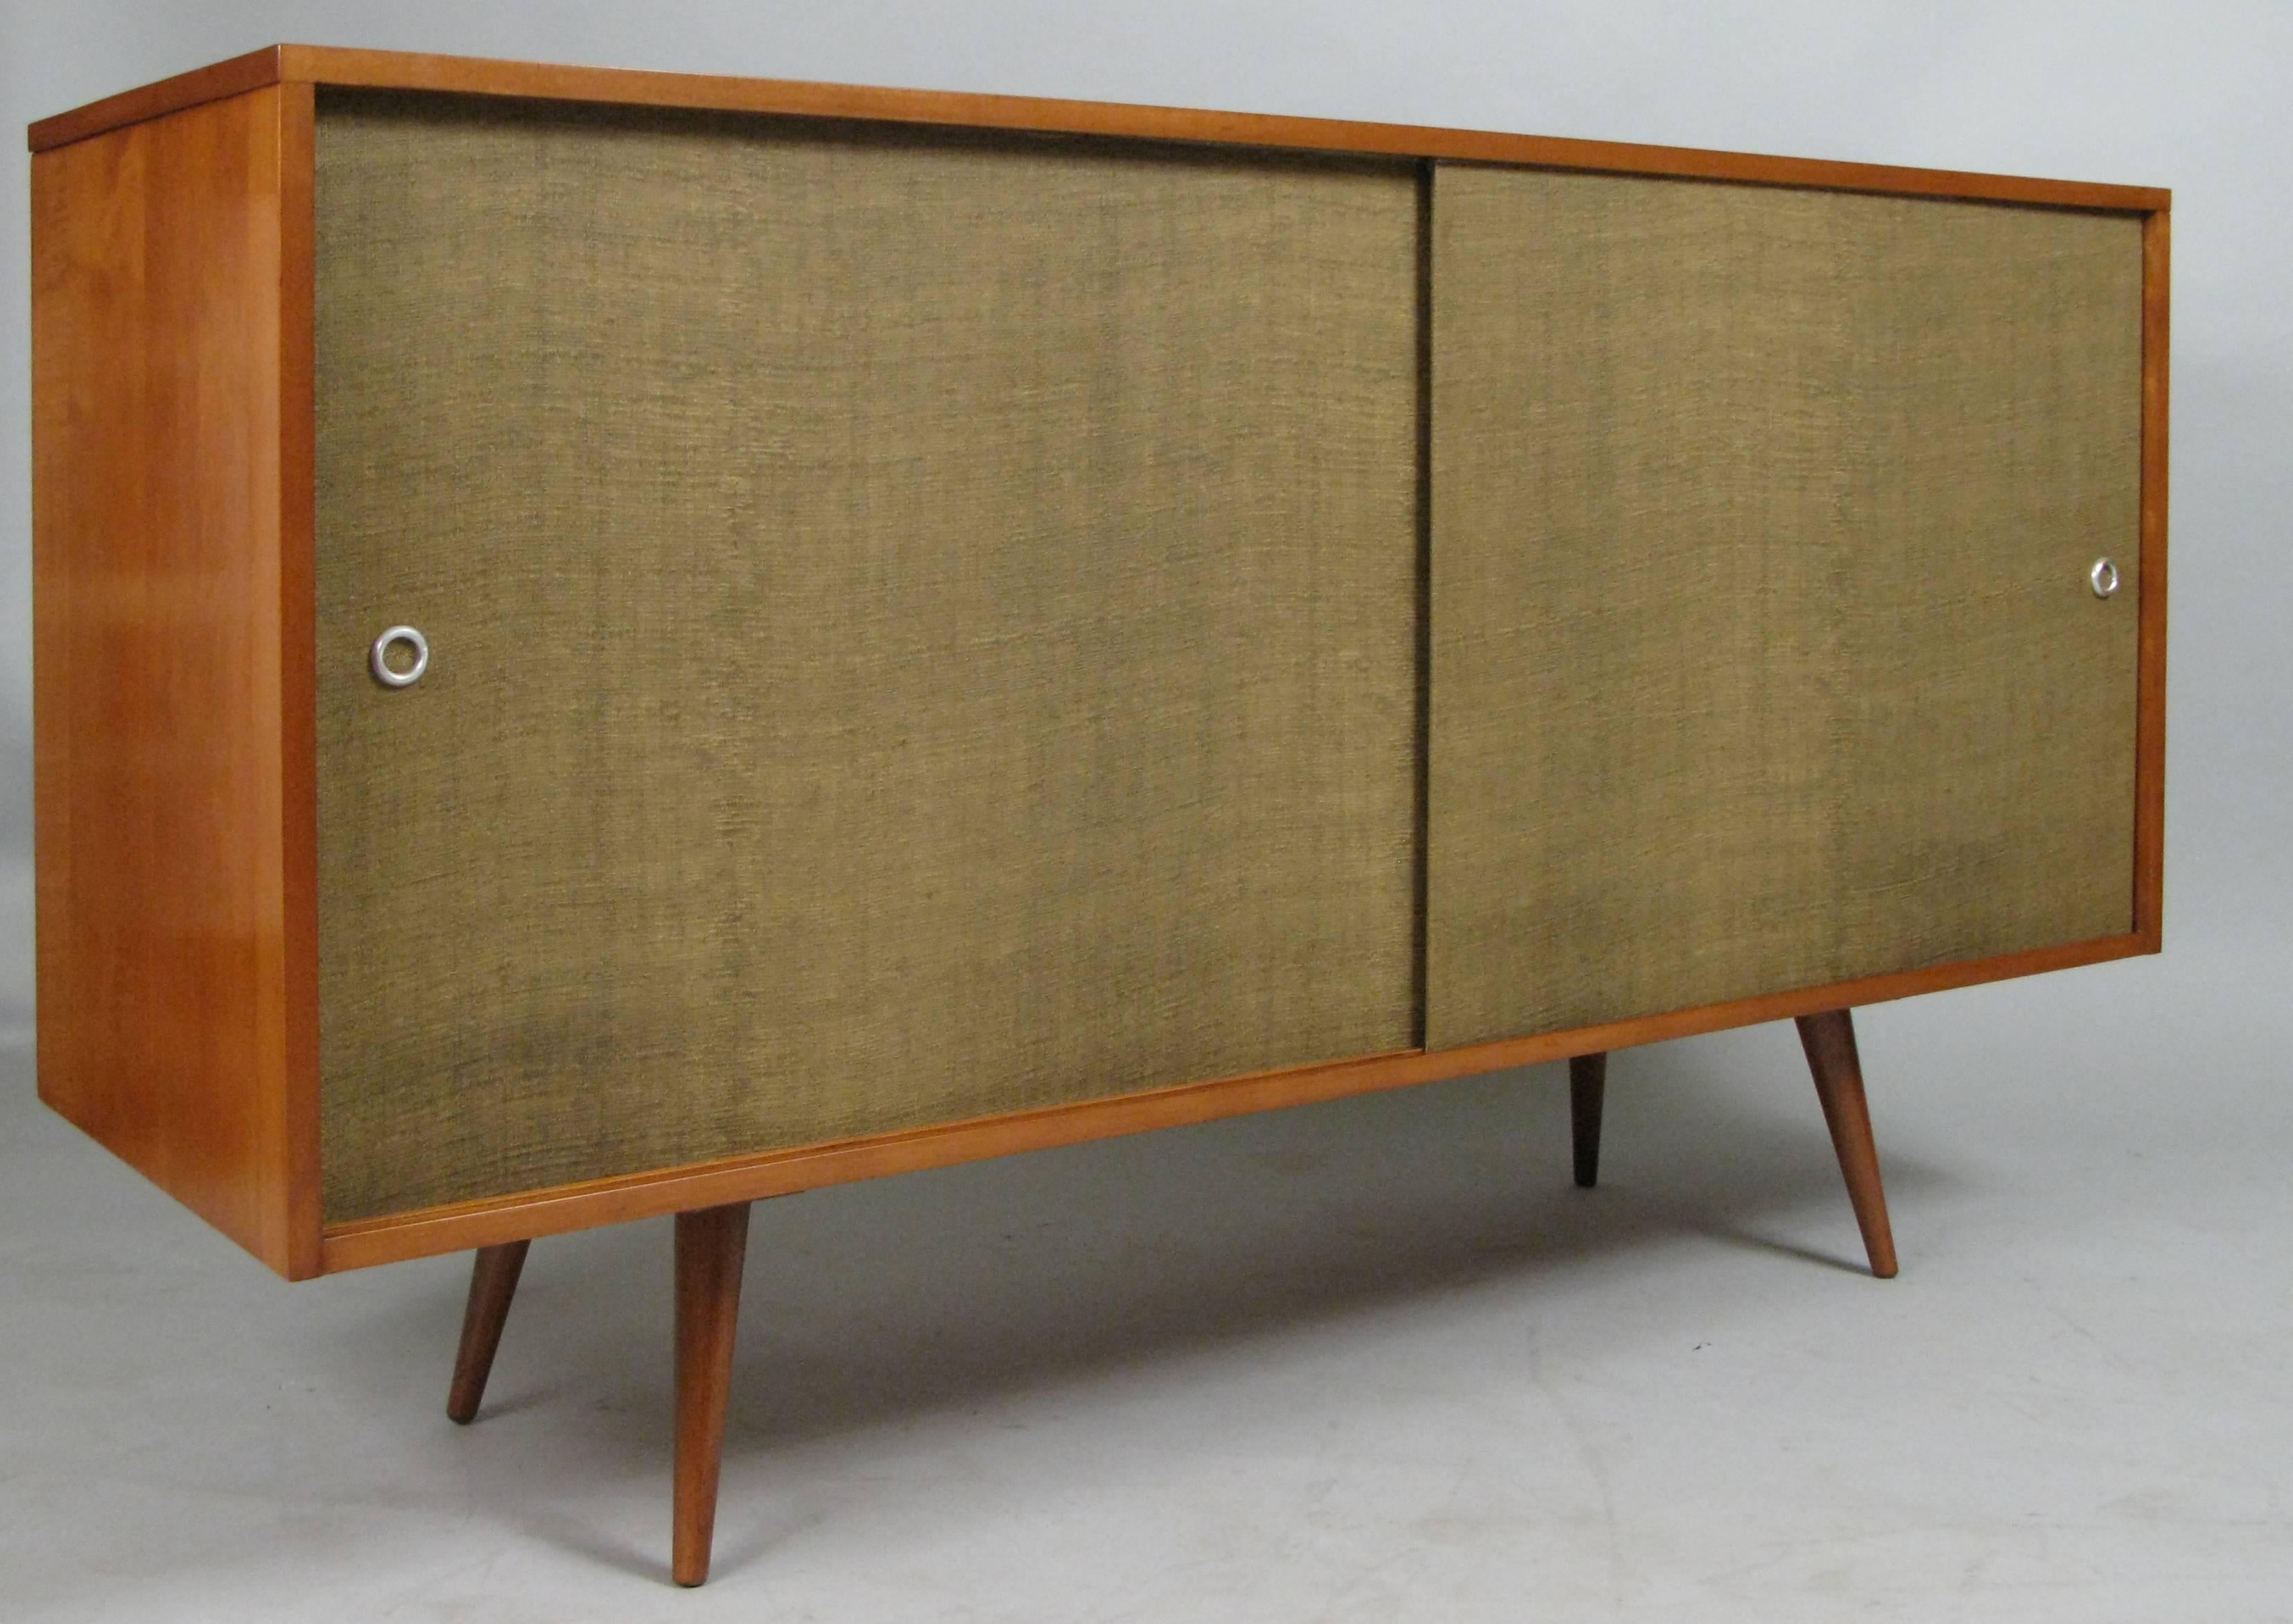 A classic mid-20th century birch credenza by Paul McCobb. Gracious large cabinet with sliding doors covered in McCobb's signature grasscloth with zinc hardware. Divided interior is fitted with four drawers and an adjustable shelf. Expertly restored